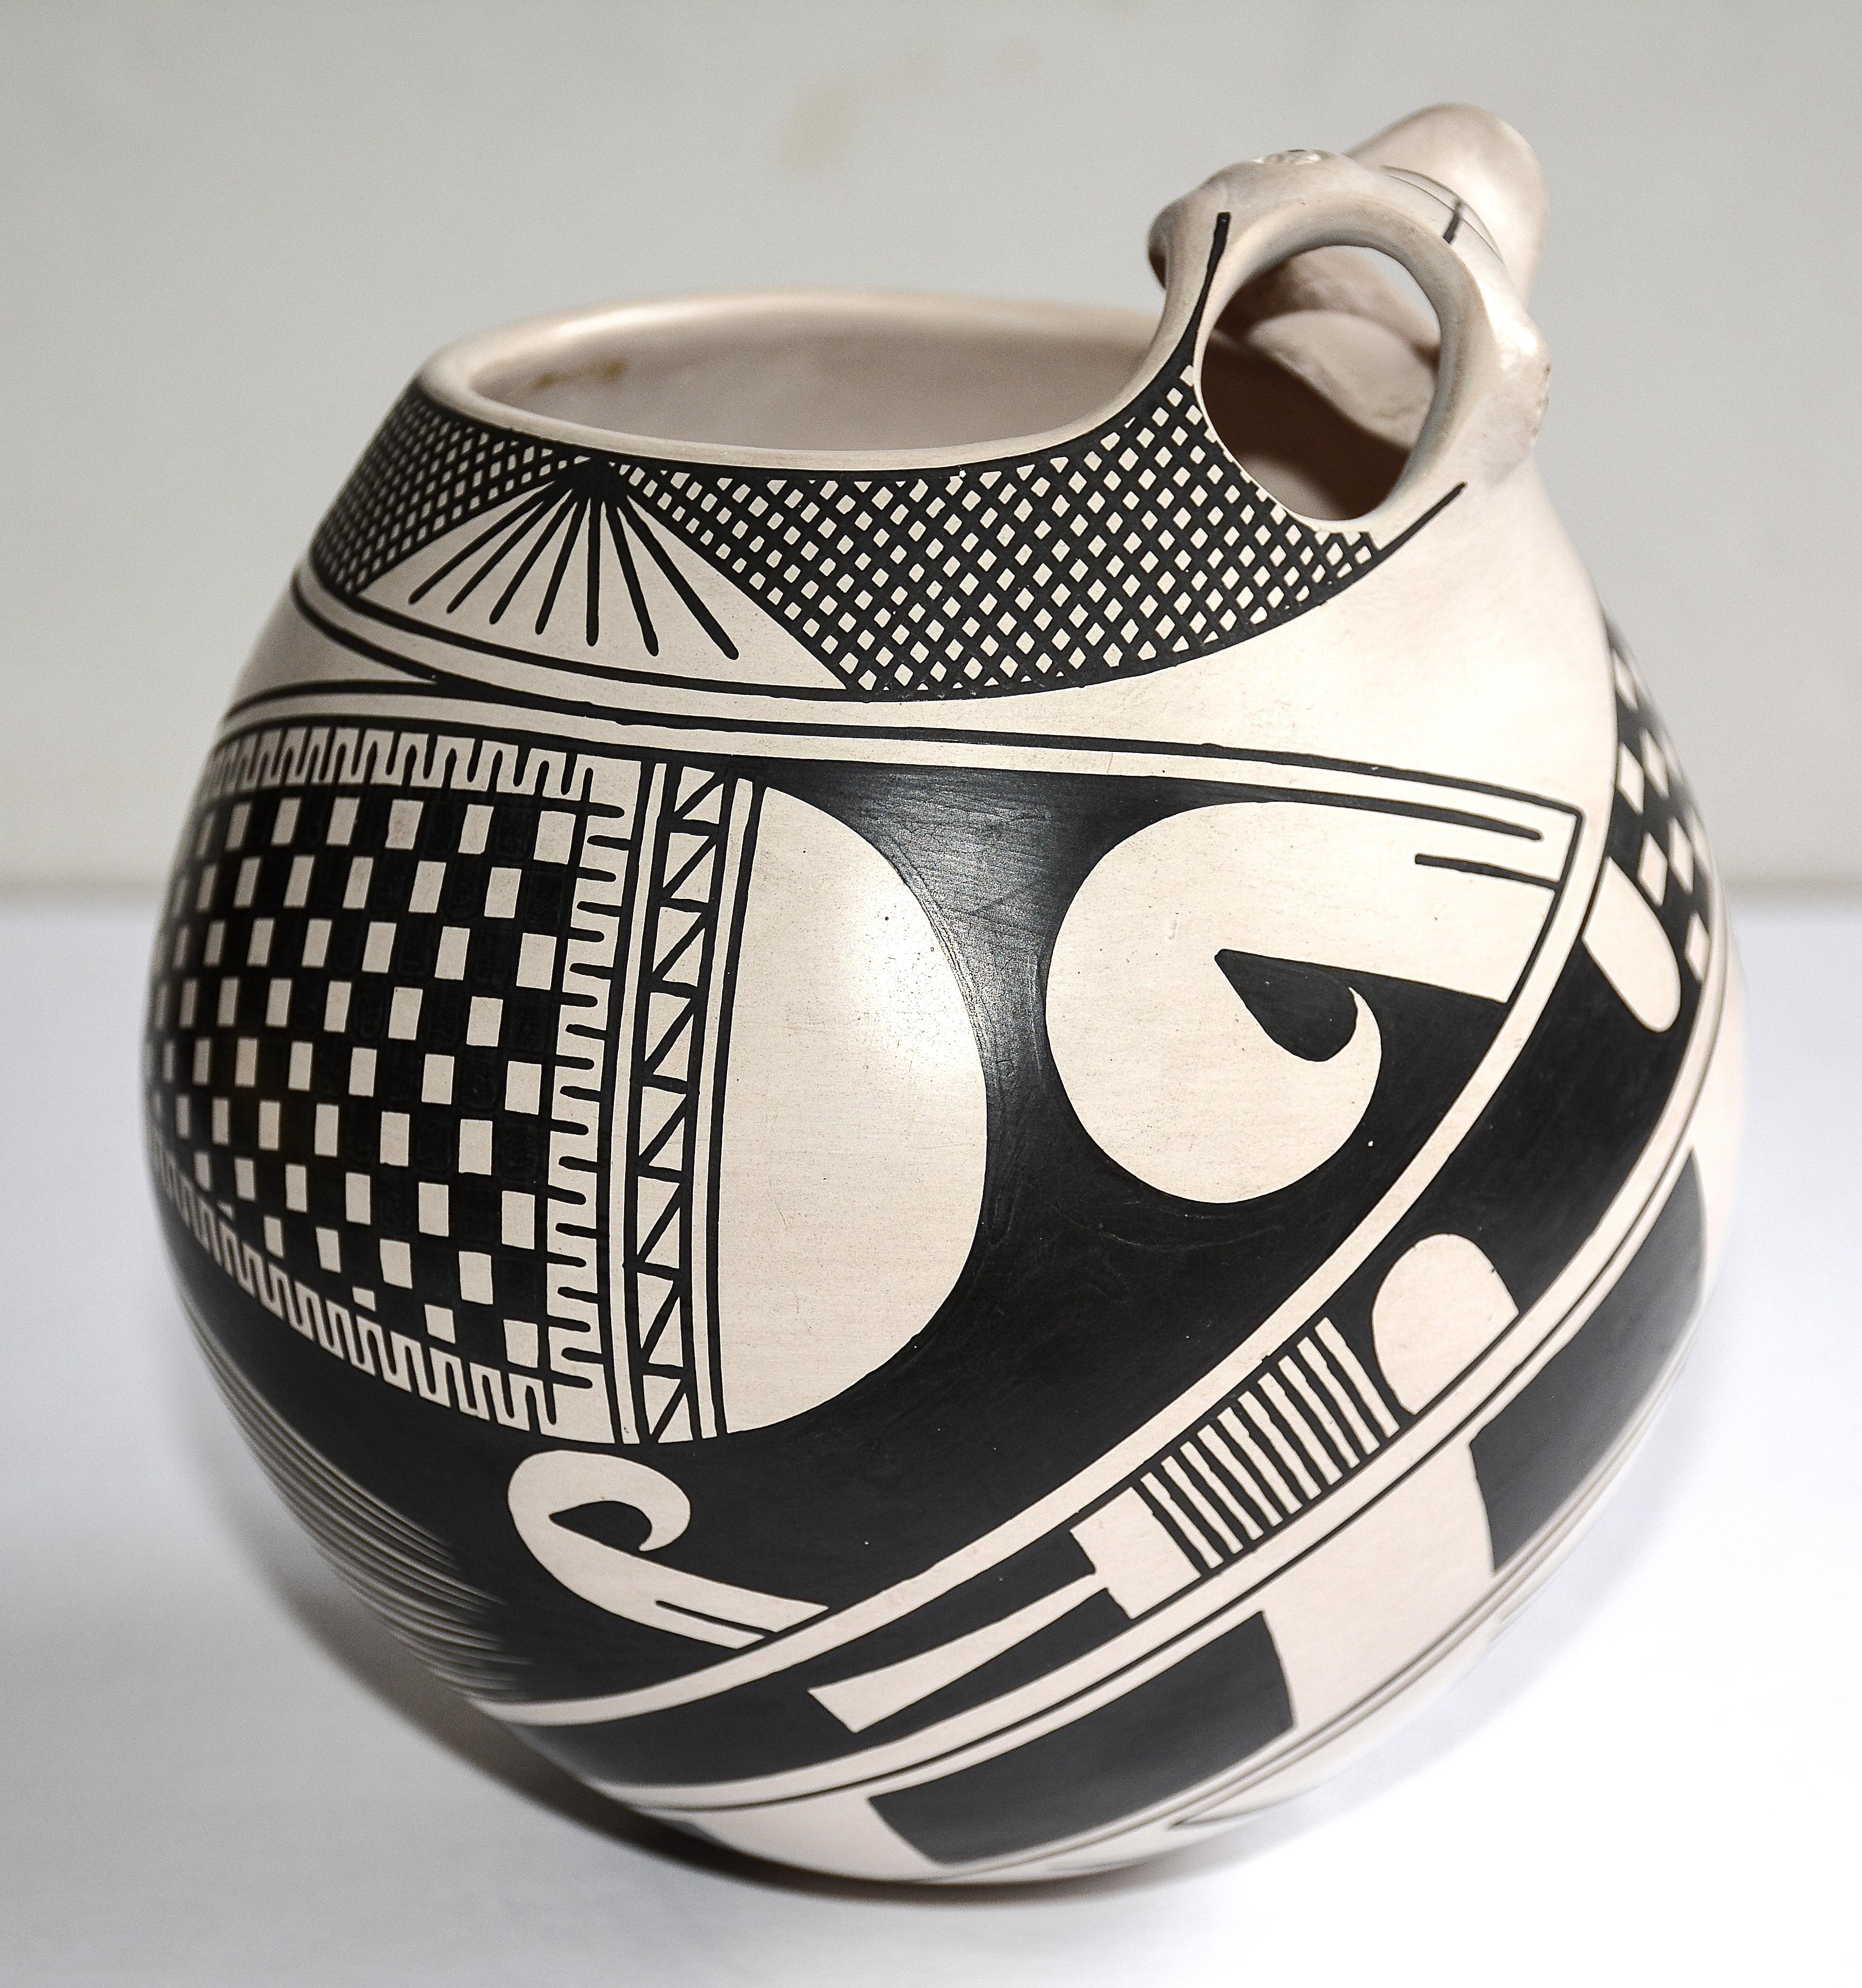 White slip black geometric effigy pot
Nicolas Quezada, Master Potter (1948 - 2011)
1988
Hand coiled low fired clay
Pueblo Quezada, Mata Ortiz, Chihuahua, Mexico
Measure: 6 inches H. x 5.5 inches in Diameter

Nicolas Quezada was the younger brother